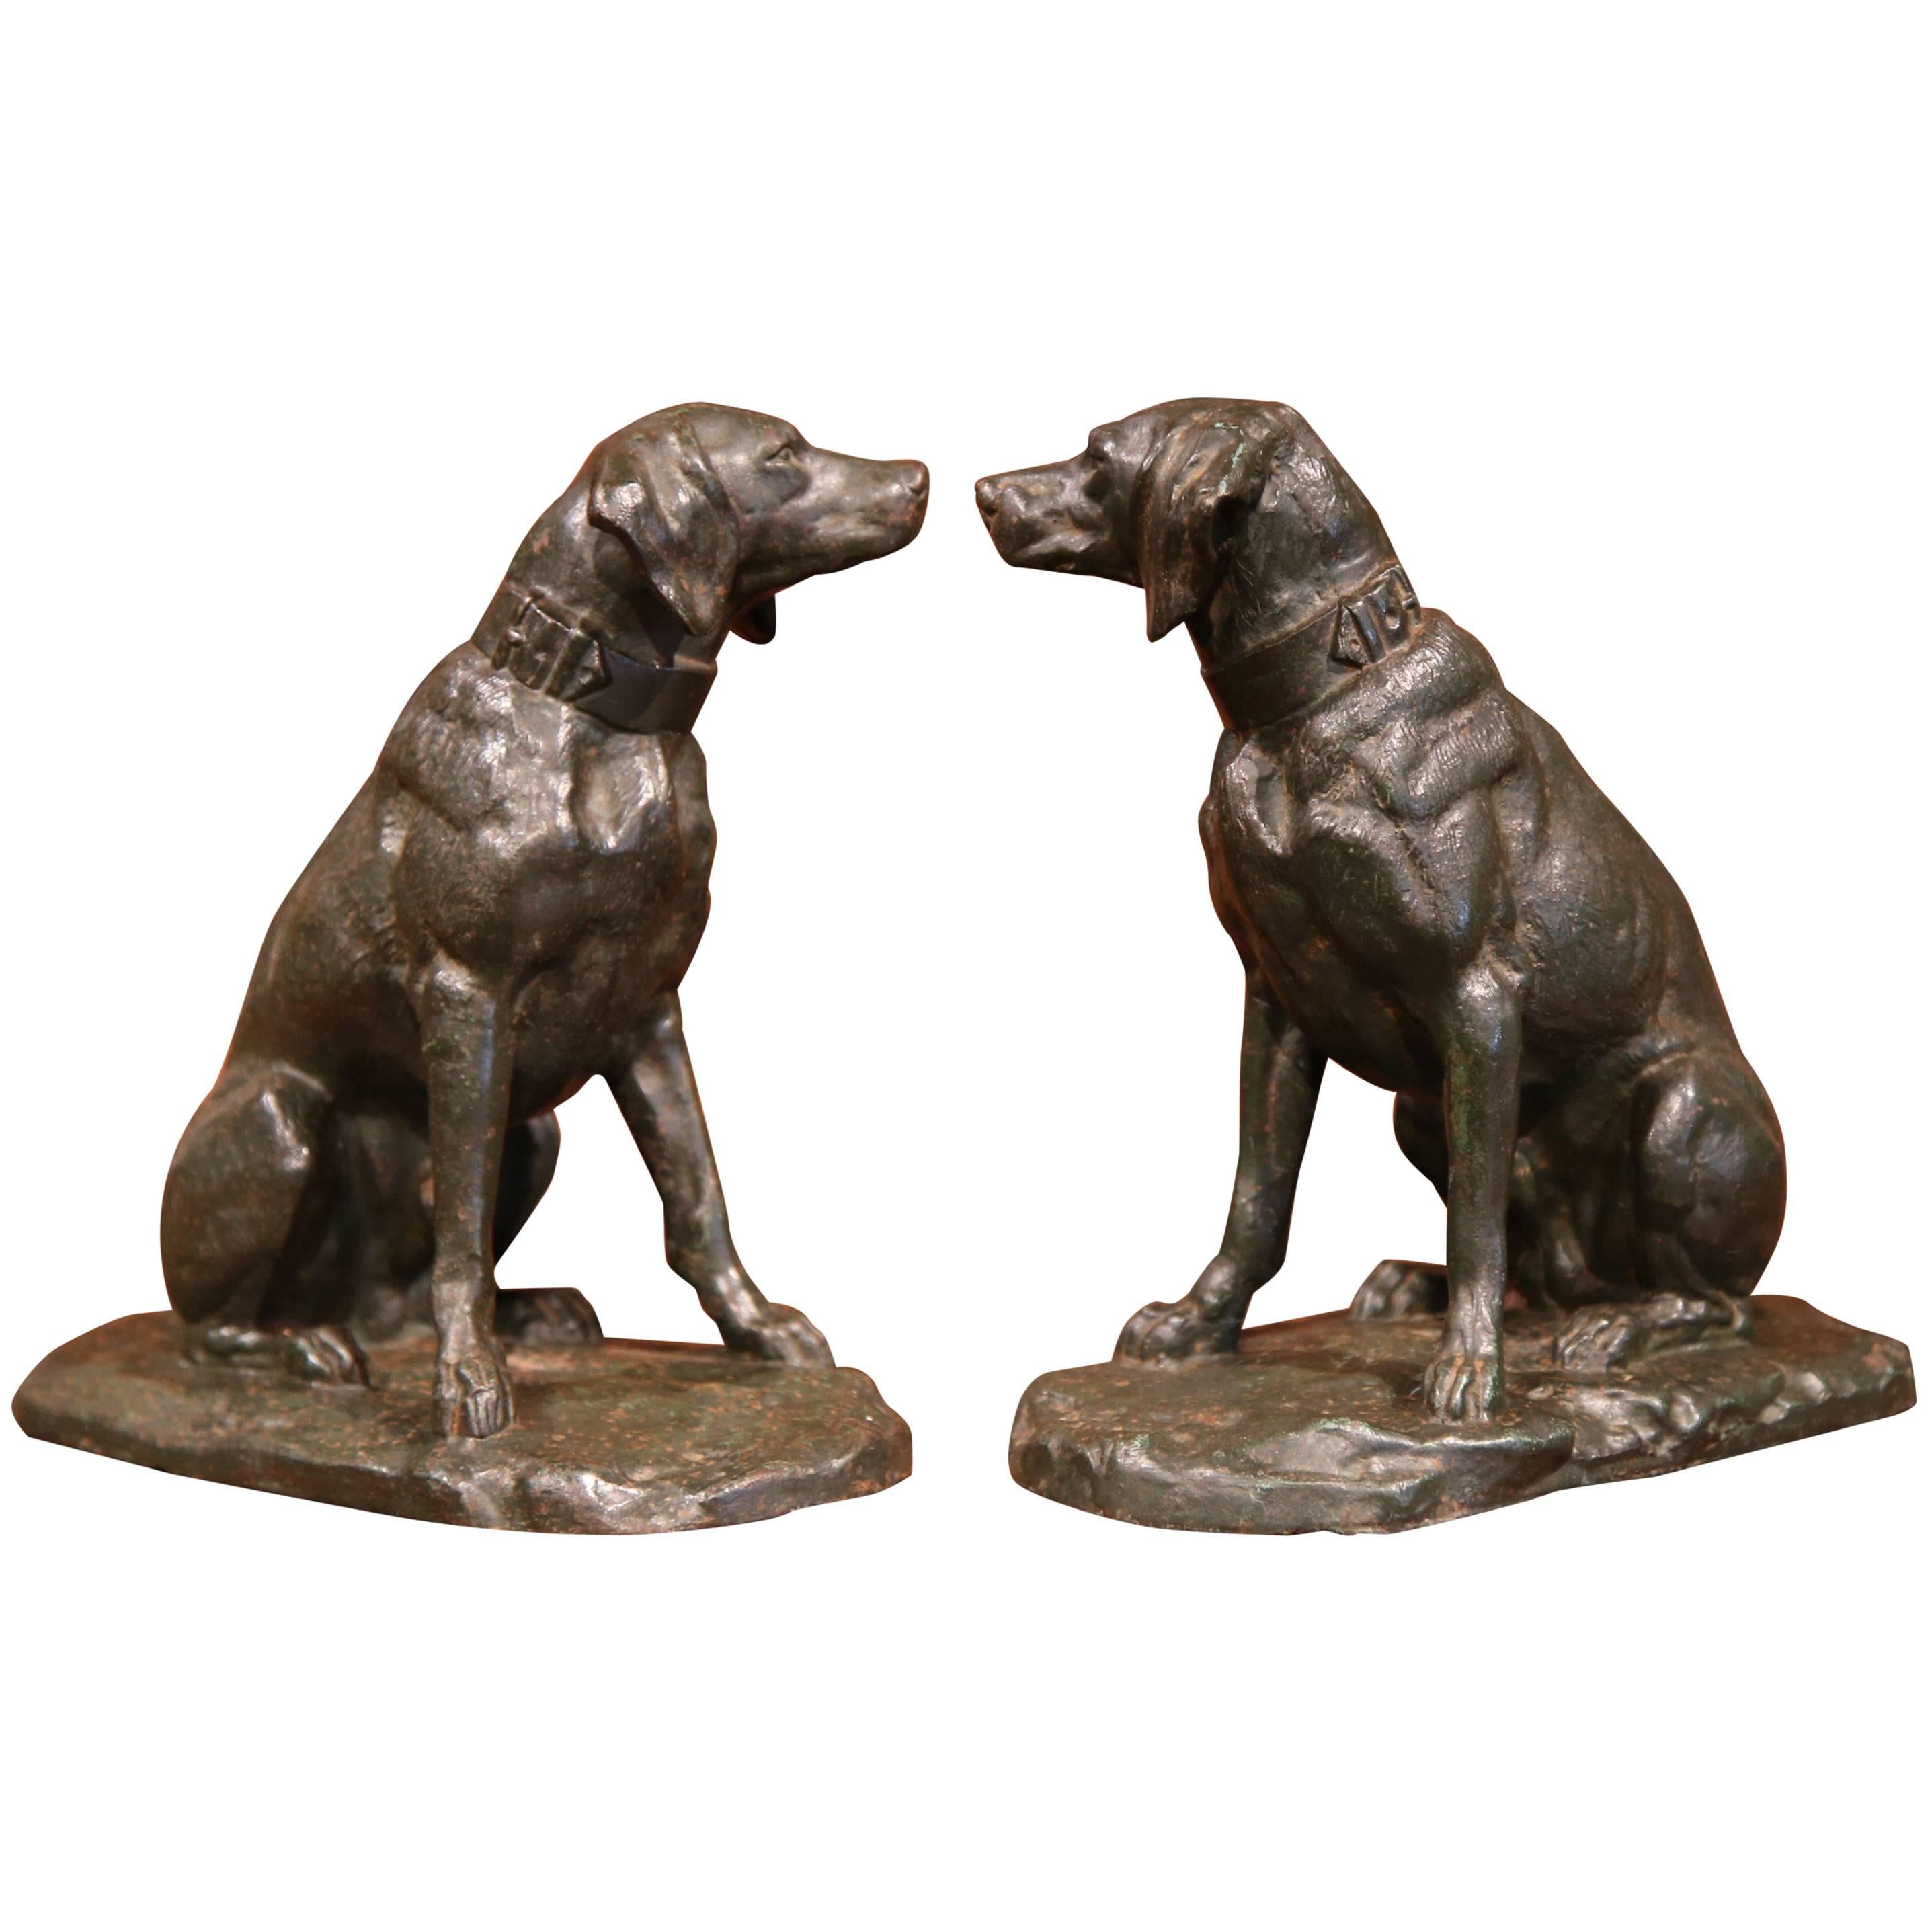 Pair of 19th Century French Patinated Bronze Labrador Dogs Sculptures